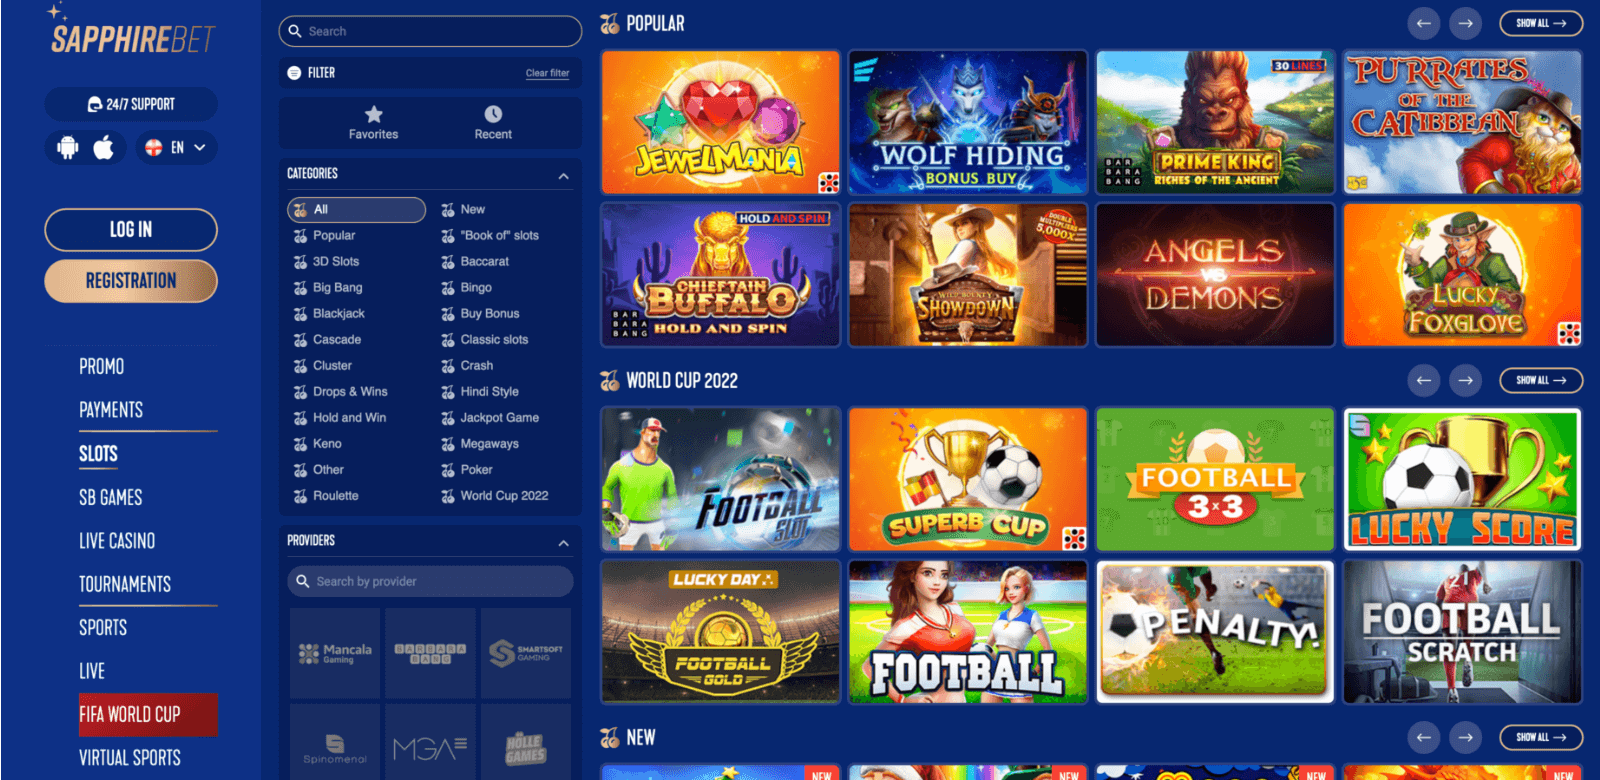 SapphireBet has dozens of exciting slots, all available to players from India